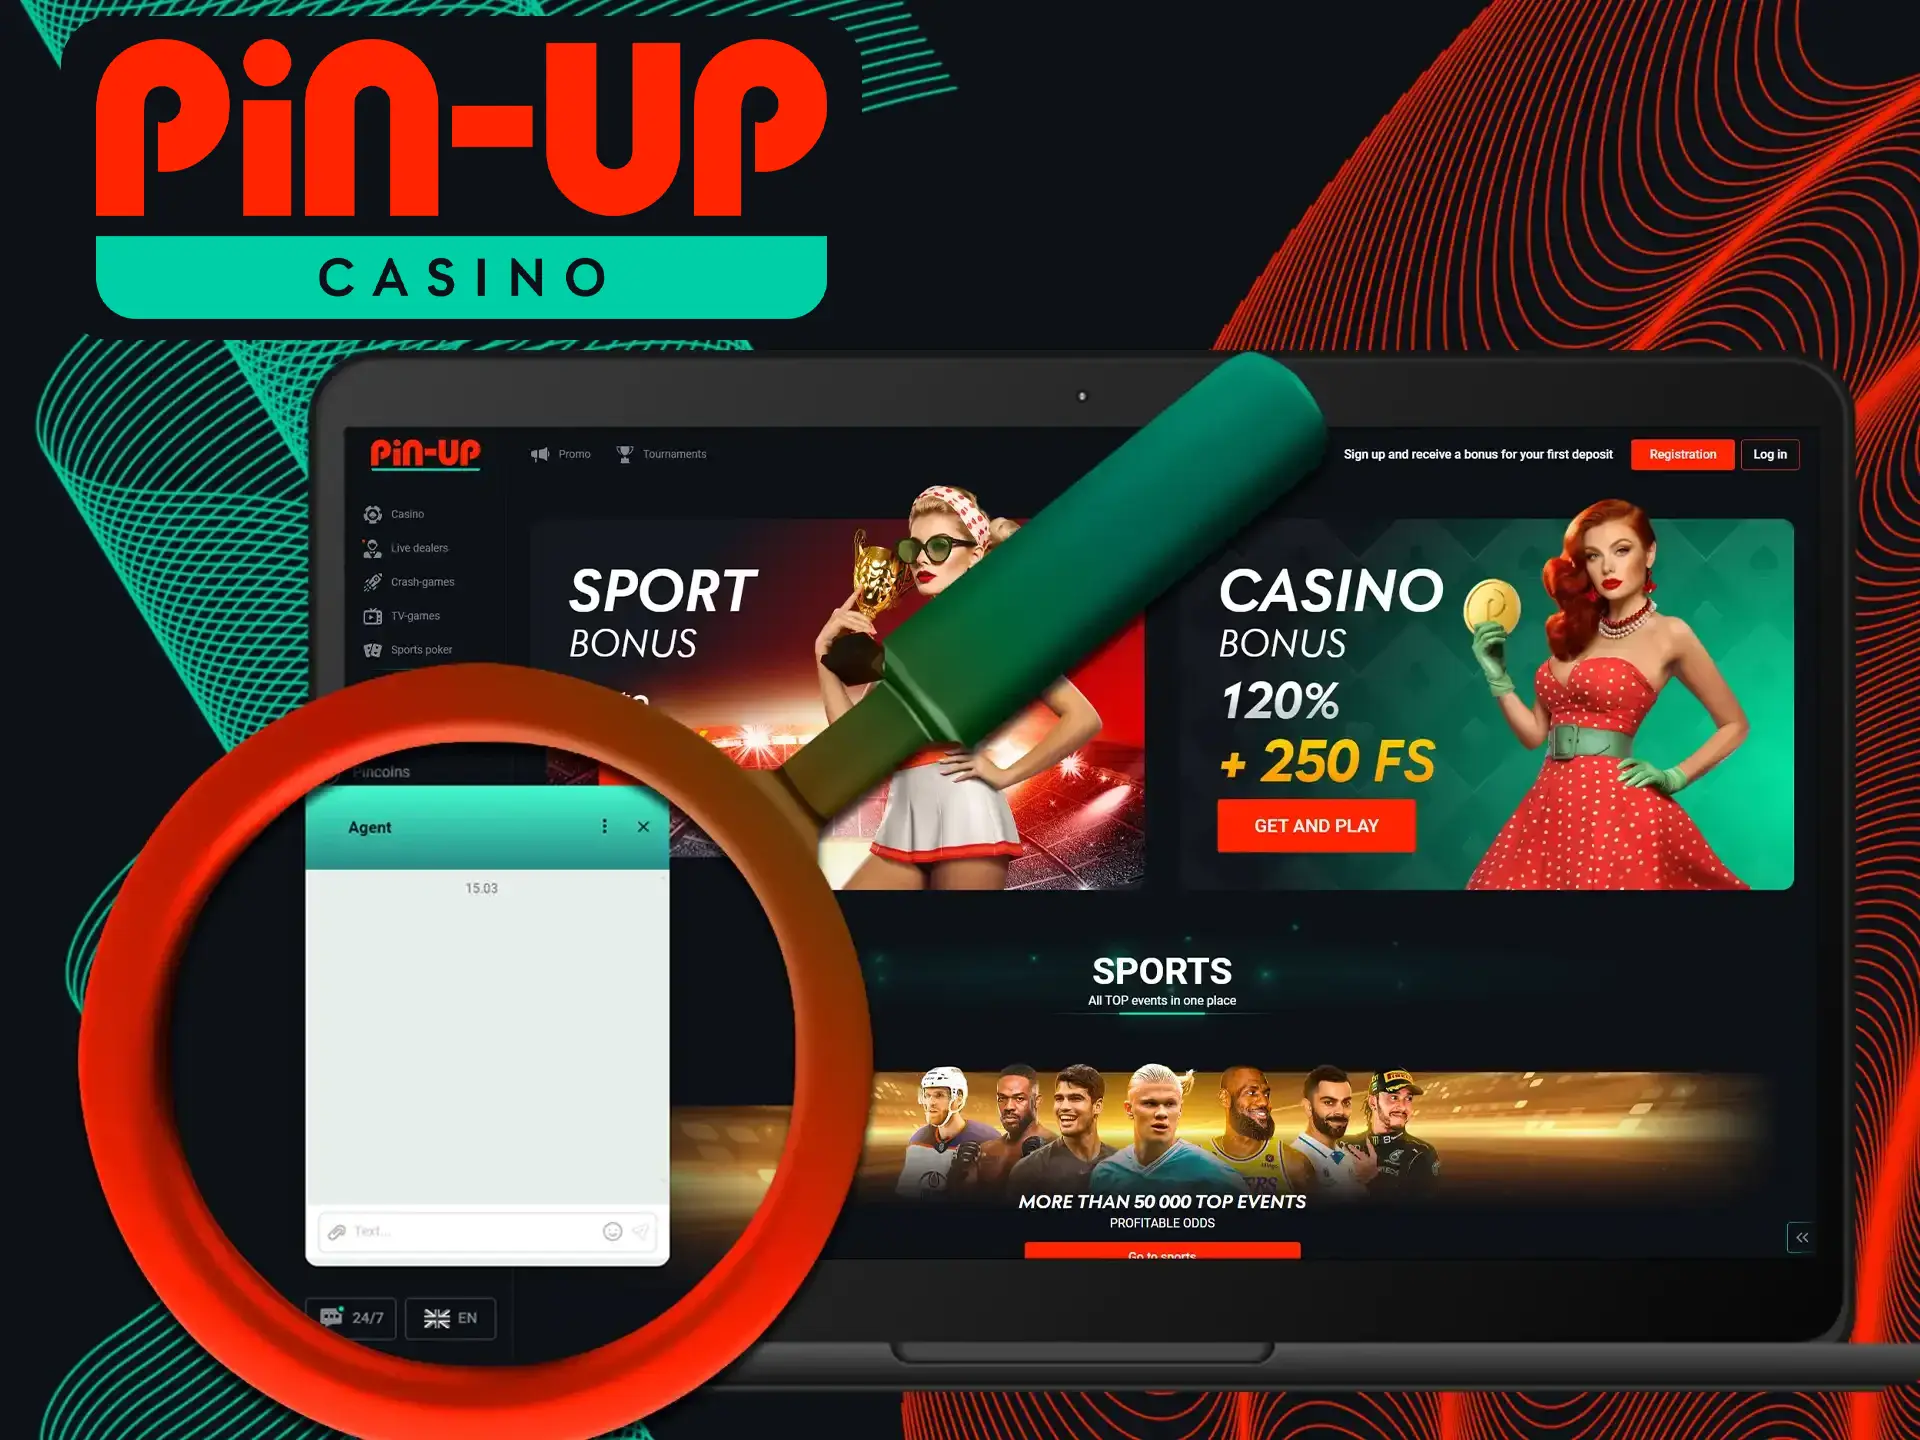 If you encounter any issues, you can conveniently contact Pin-Up Casino support team, available 24/7.